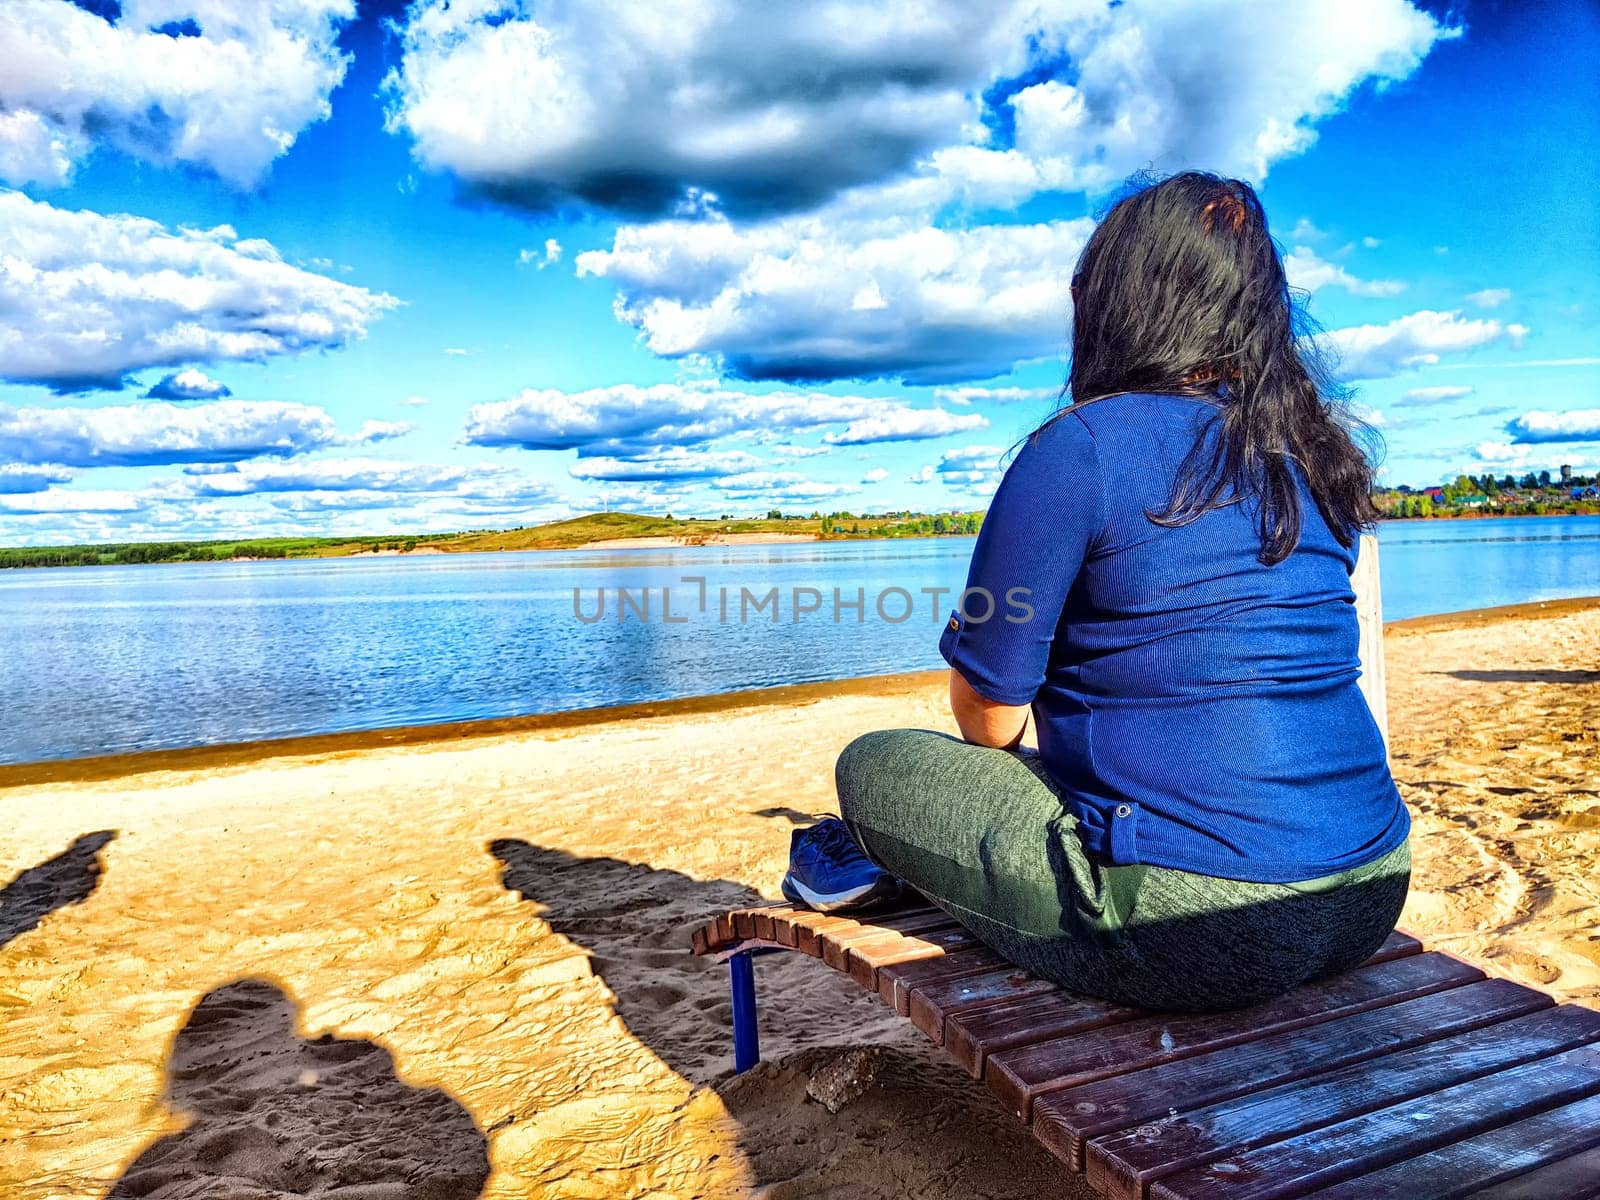 Serene Lakeside Contemplation at Sunset and fat plump woman. Female Person sitting on a bench by a lake, reflecting under a vibrant sky by keleny